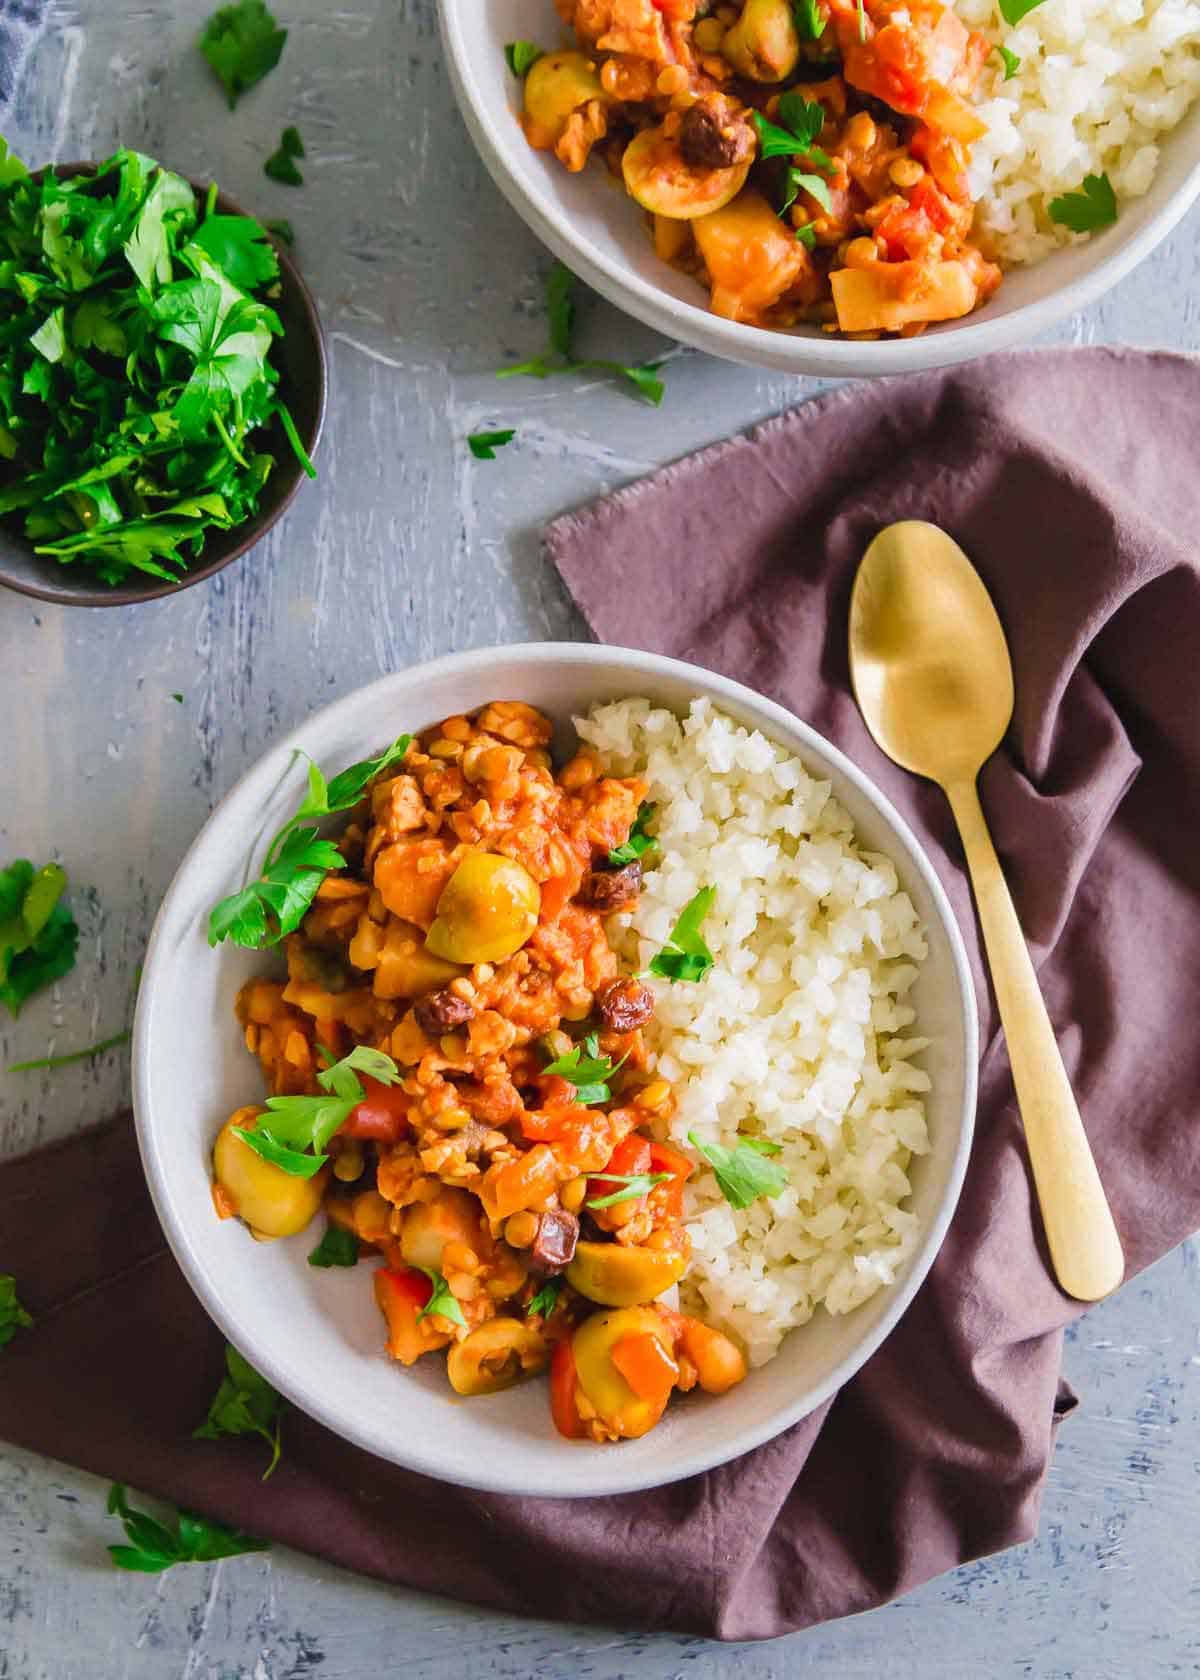 Vegan Picadillo - Plant Based Tempeh and Lentil Picadillo Recipe - Running to the Kitchen